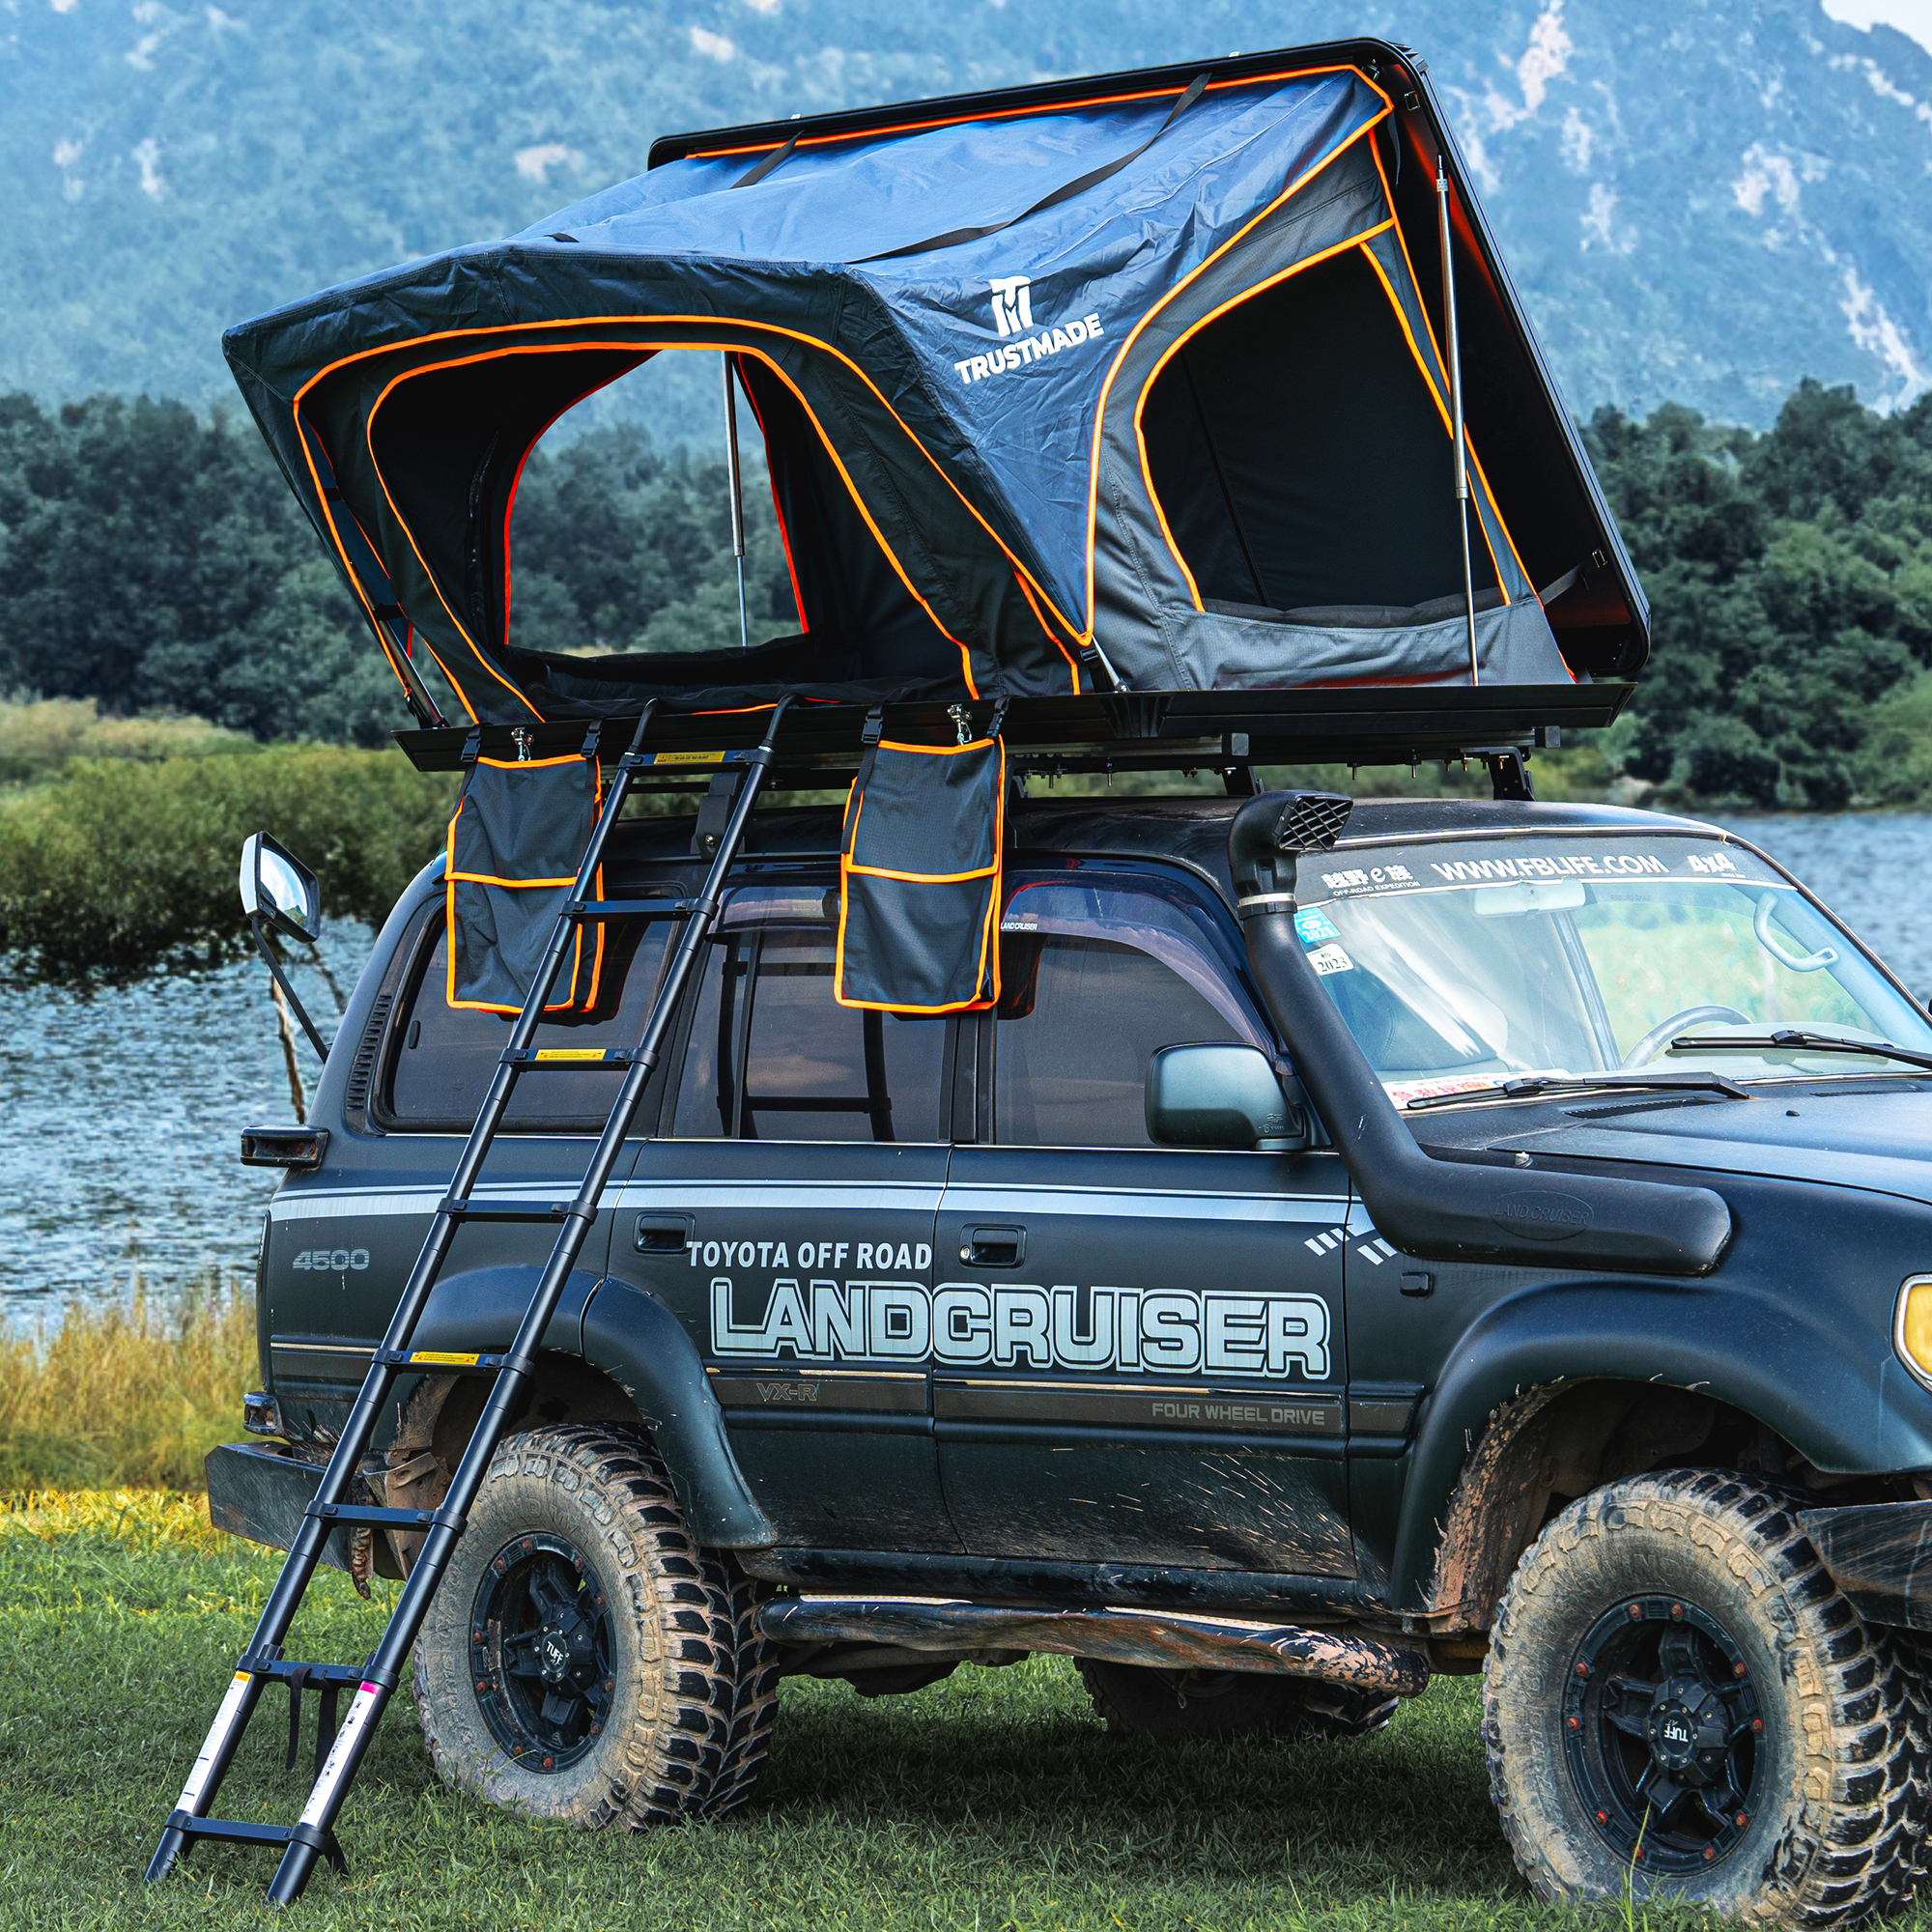 Can you put a rooftop tent on a camper?